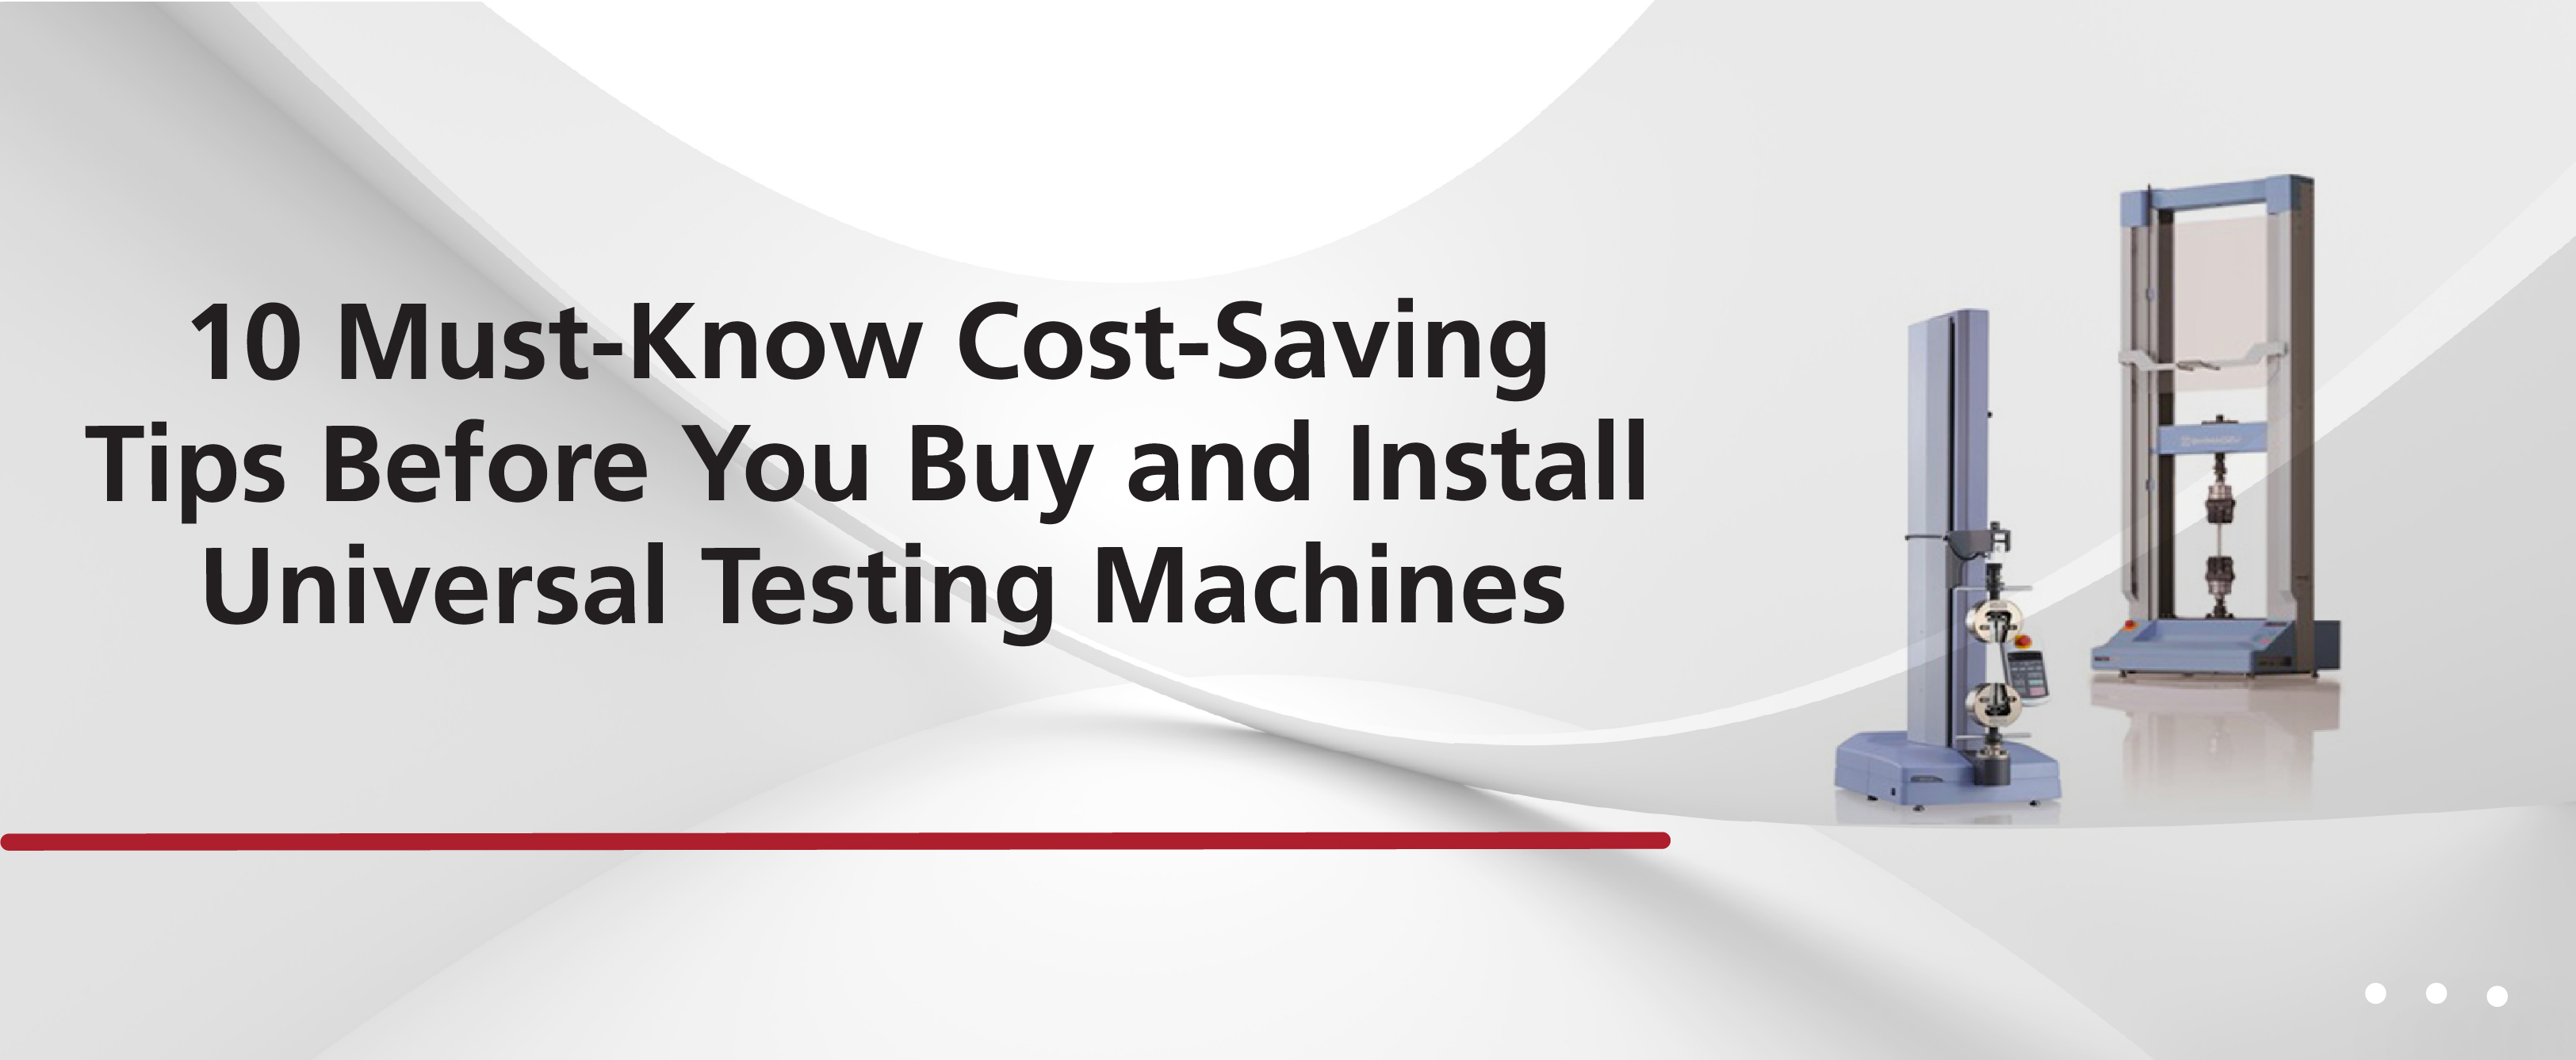 10 Must-Know Cost-Saving Tips Before You Buy and Install Universal Testing Machines Webinar